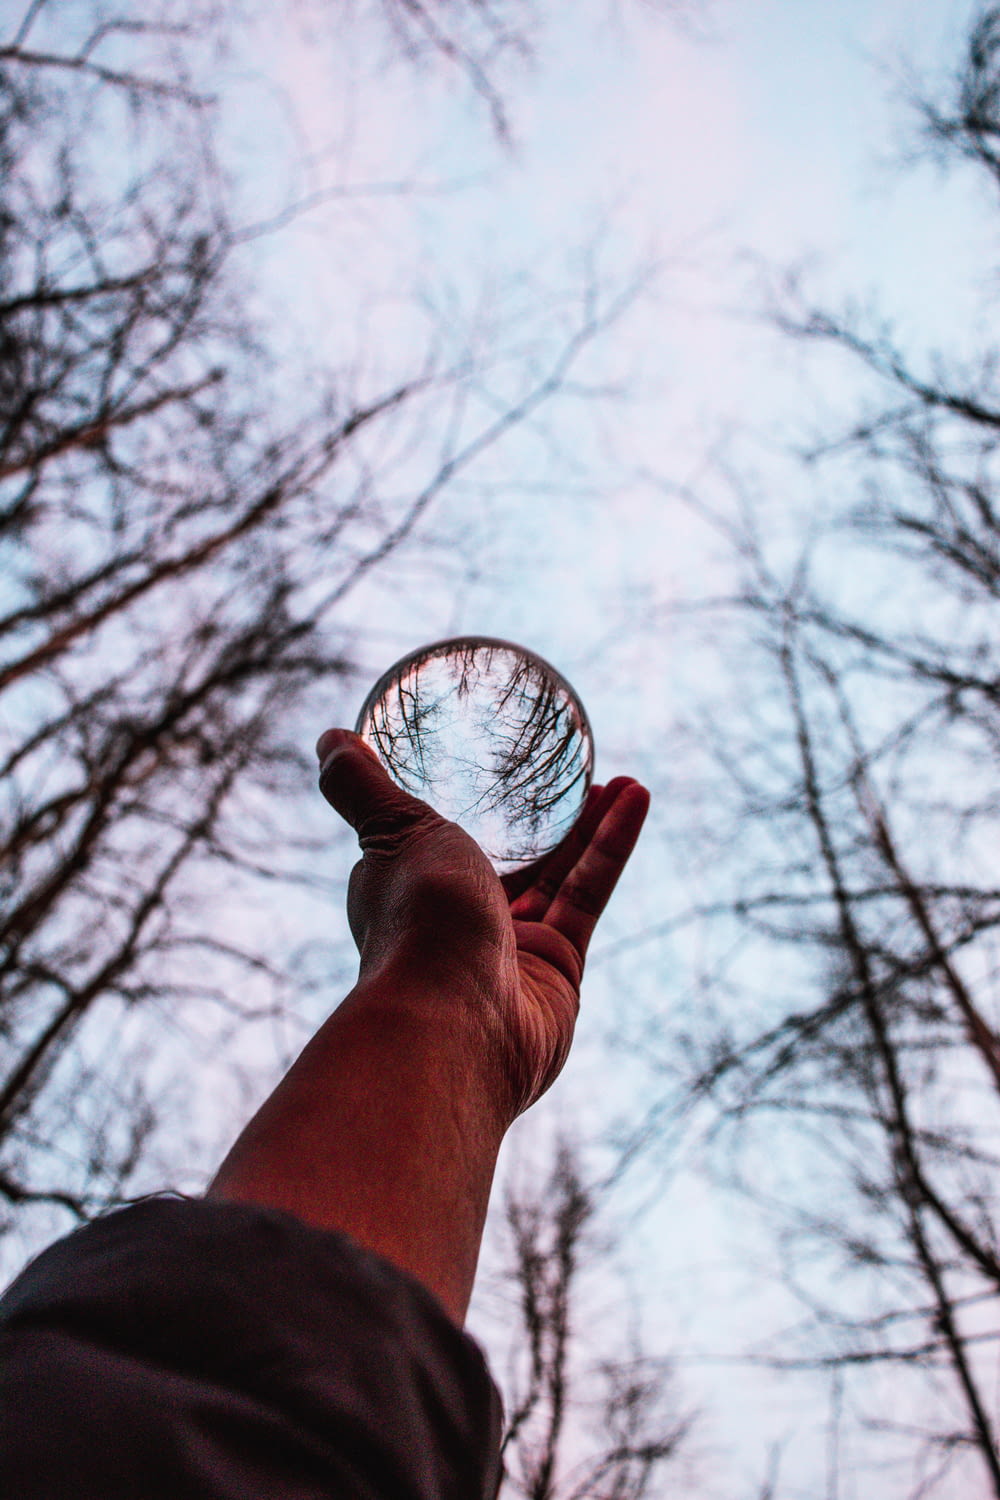 a hand holding a glass bowl in front of trees